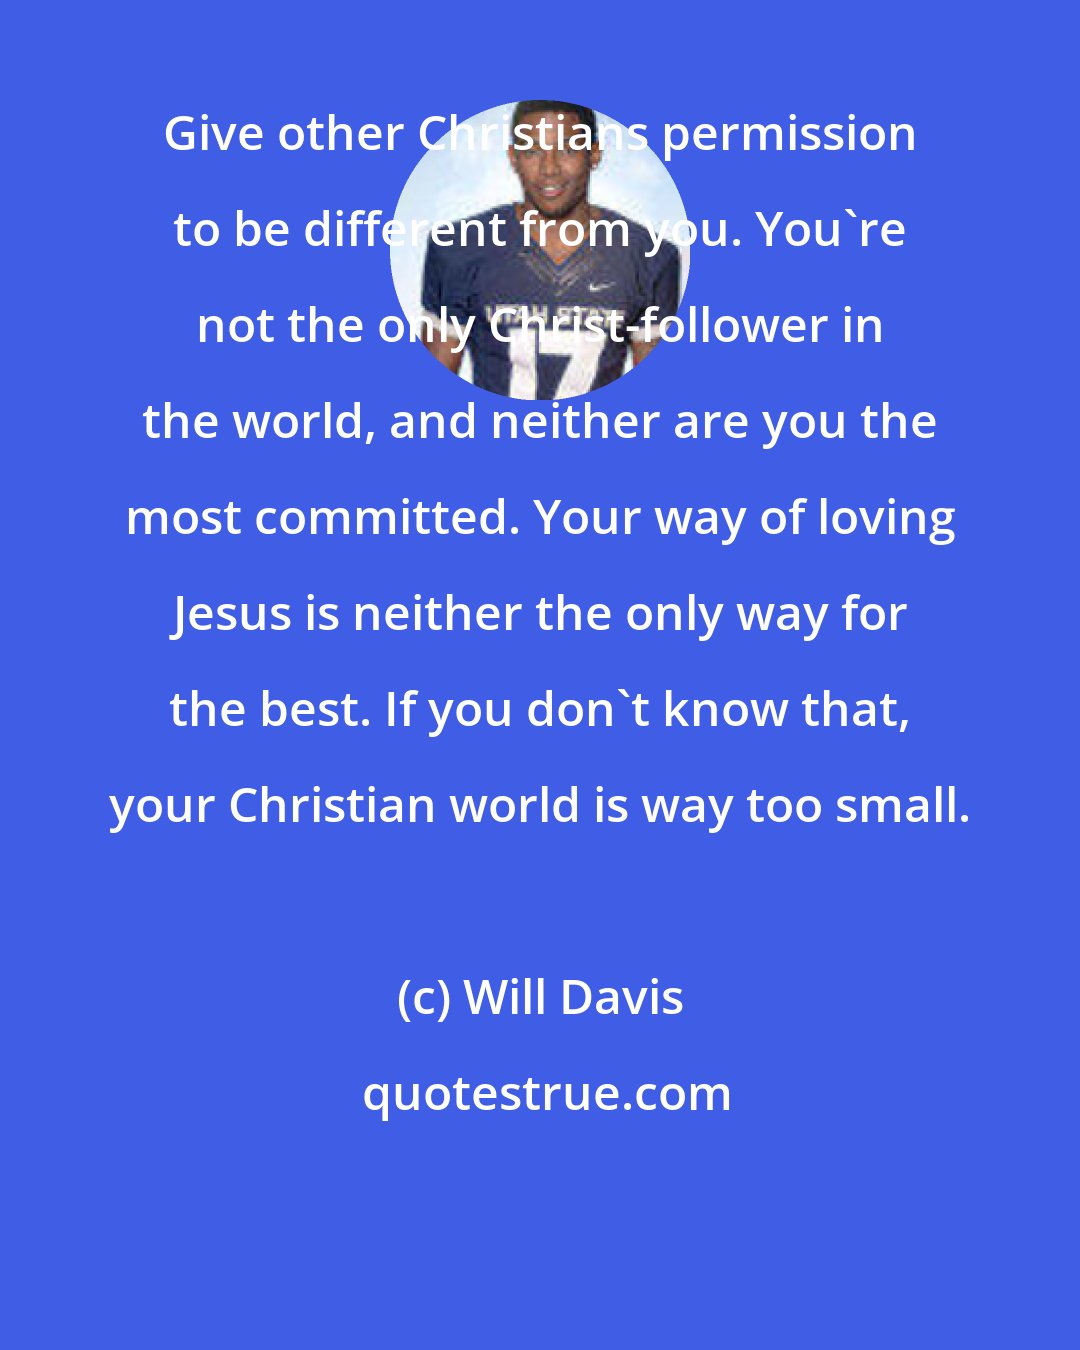 Will Davis: Give other Christians permission to be different from you. You're not the only Christ-follower in the world, and neither are you the most committed. Your way of loving Jesus is neither the only way for the best. If you don't know that, your Christian world is way too small.